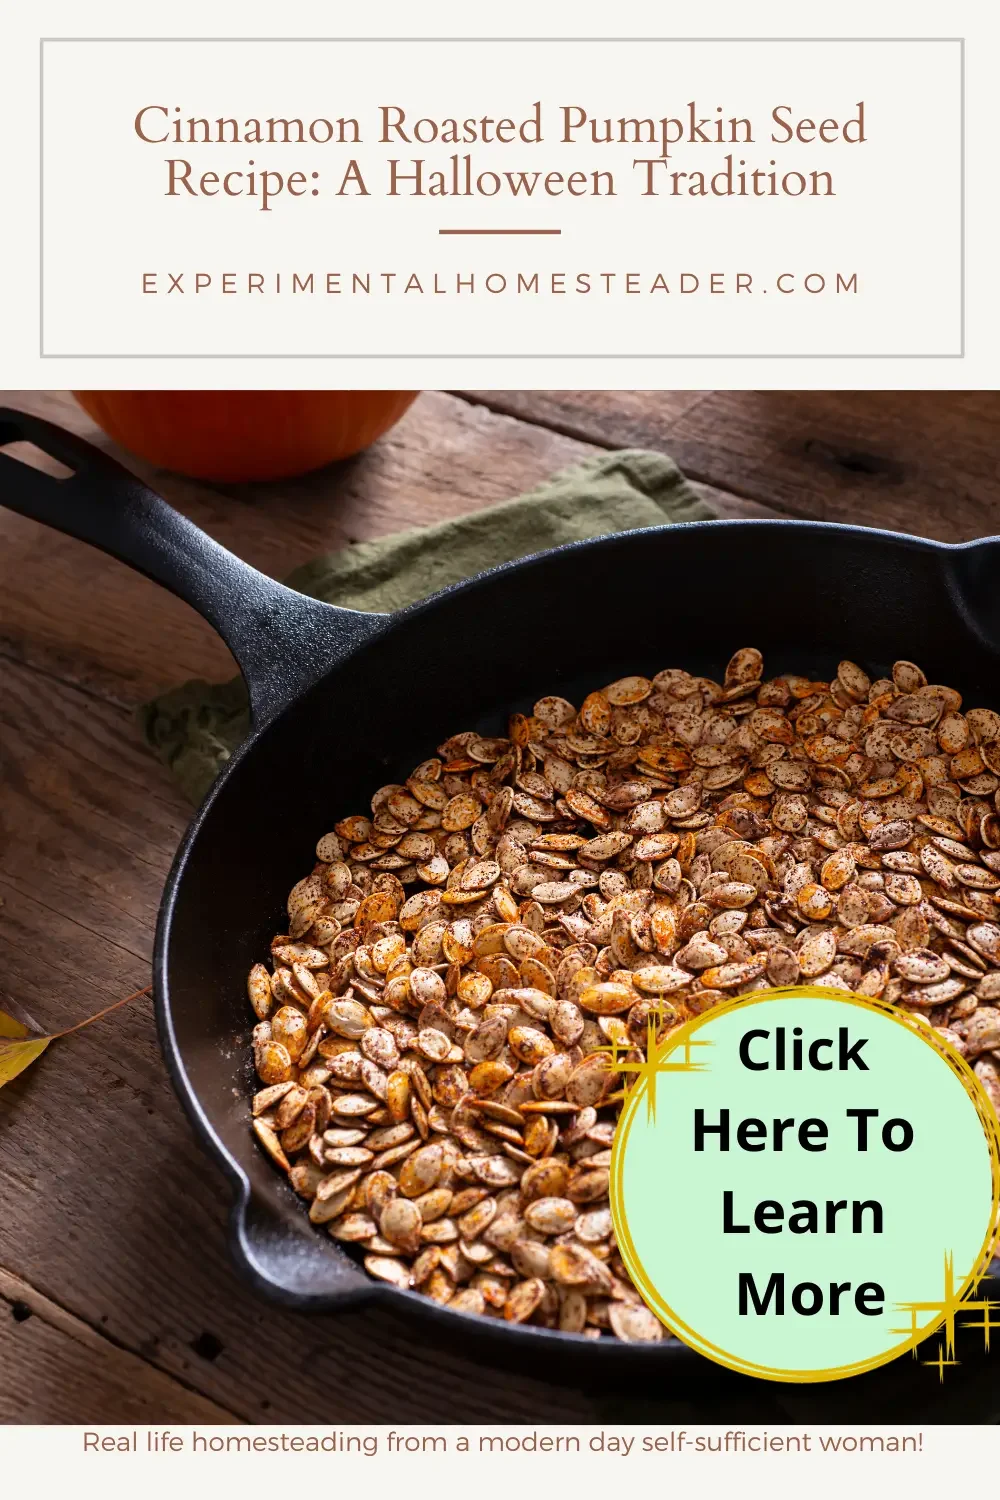 Roasted pumpkin seeds in a cast iron skillet.